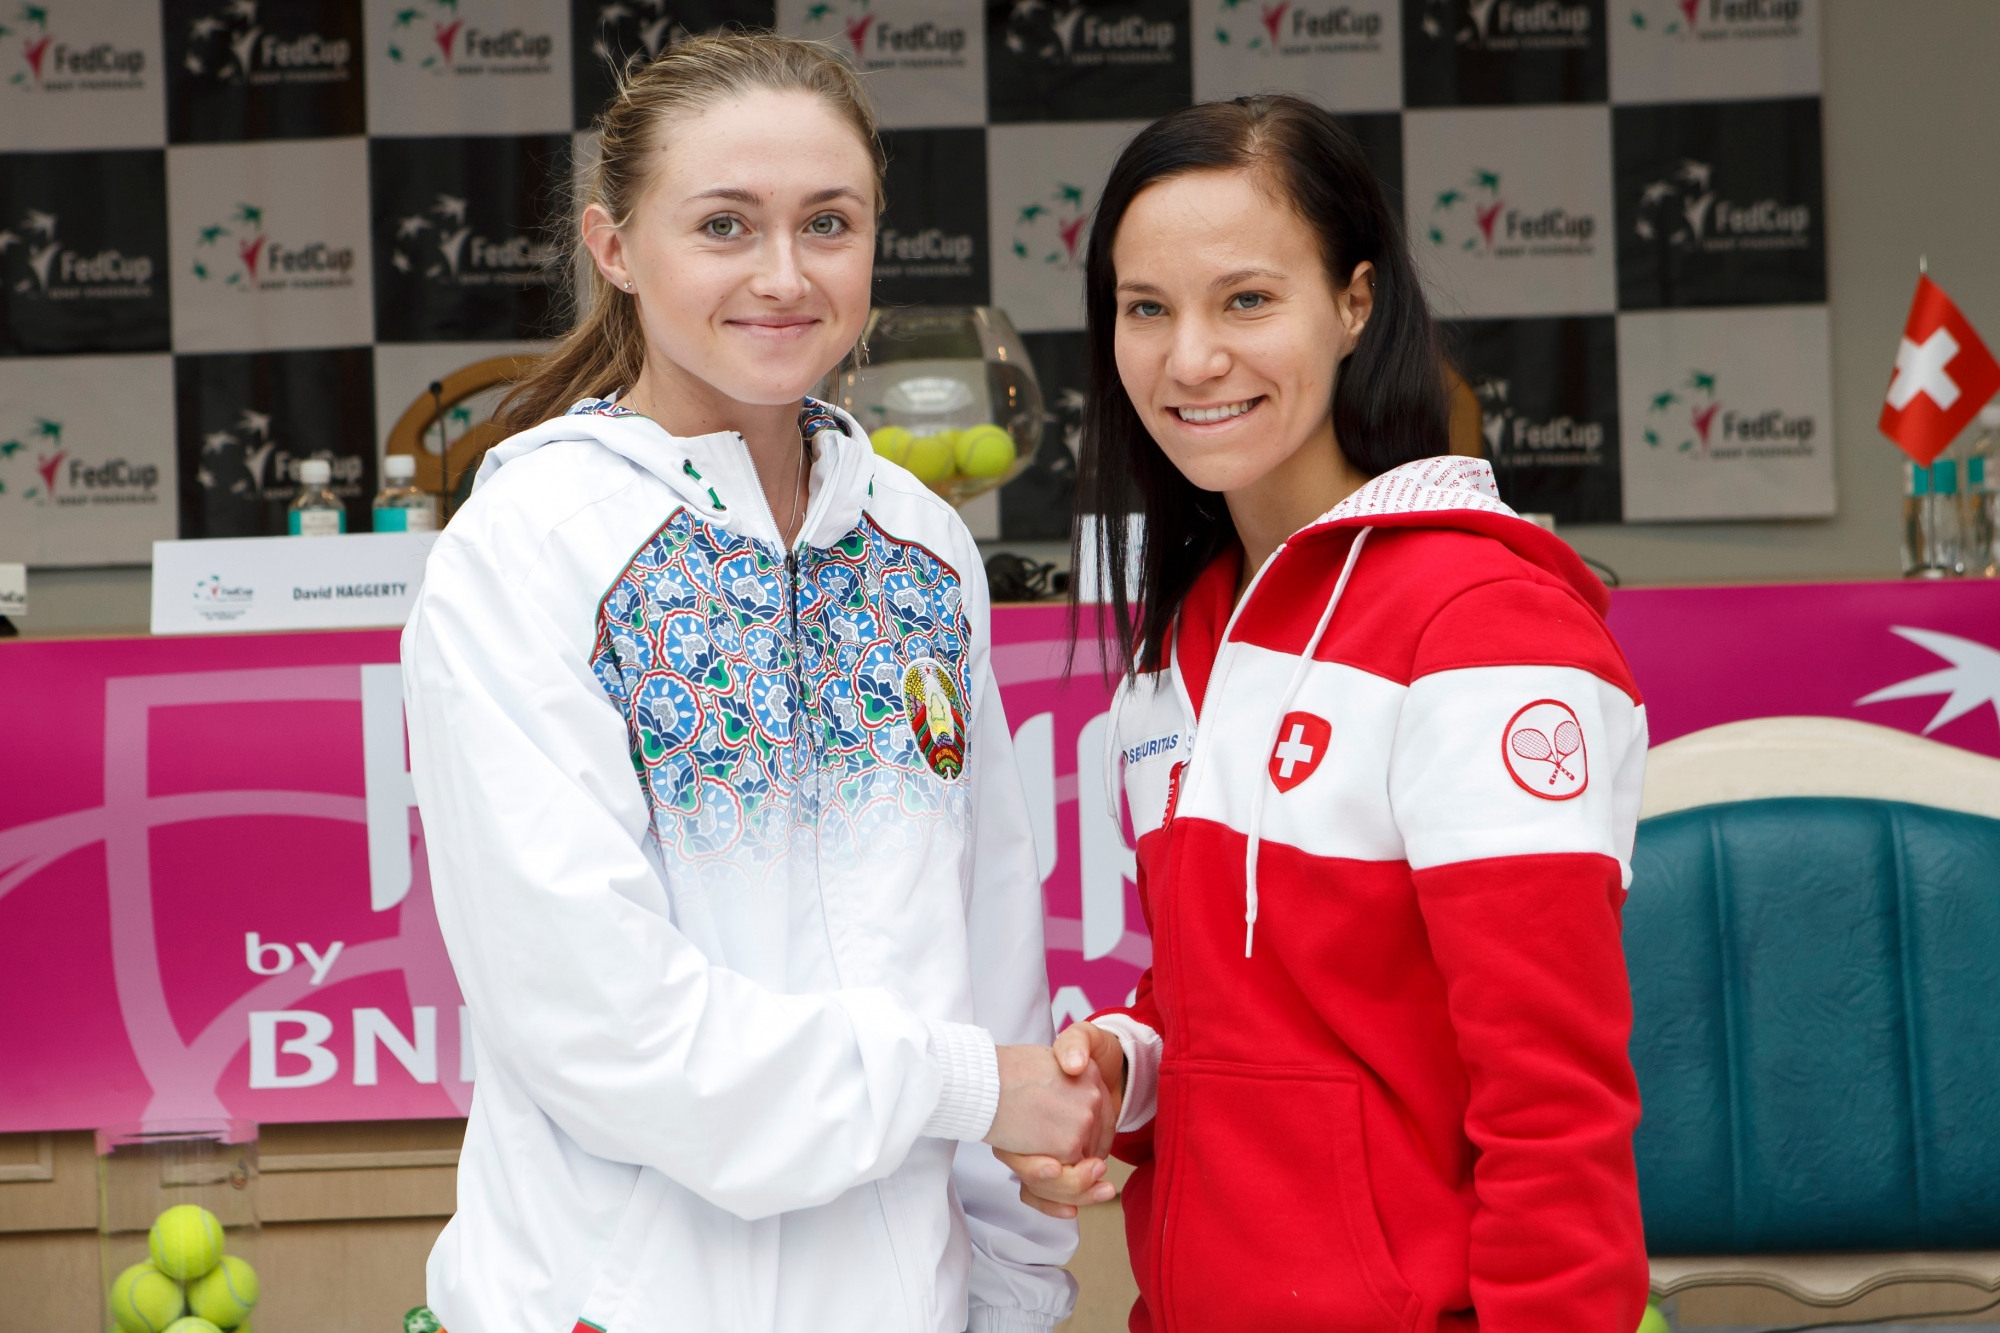 Aliaksandra Sasnovich, left, of Belarus, shakes hands with Viktorija Golubic, right, of Switzerland, for the photographers, after the drawing of the Fed Cup World Group Semifinal match between Belarus and Switzerland, in Minsk, Belarus, Friday, April 21, 2017. The Fed Cup World Group Semifinal match Belarus vs Switzerland will take place from 22 to April 23. (KEYSTONE/Salvatore Di Nolfi) BELARUS TENNIS FED CUP 2017 BLR CHE